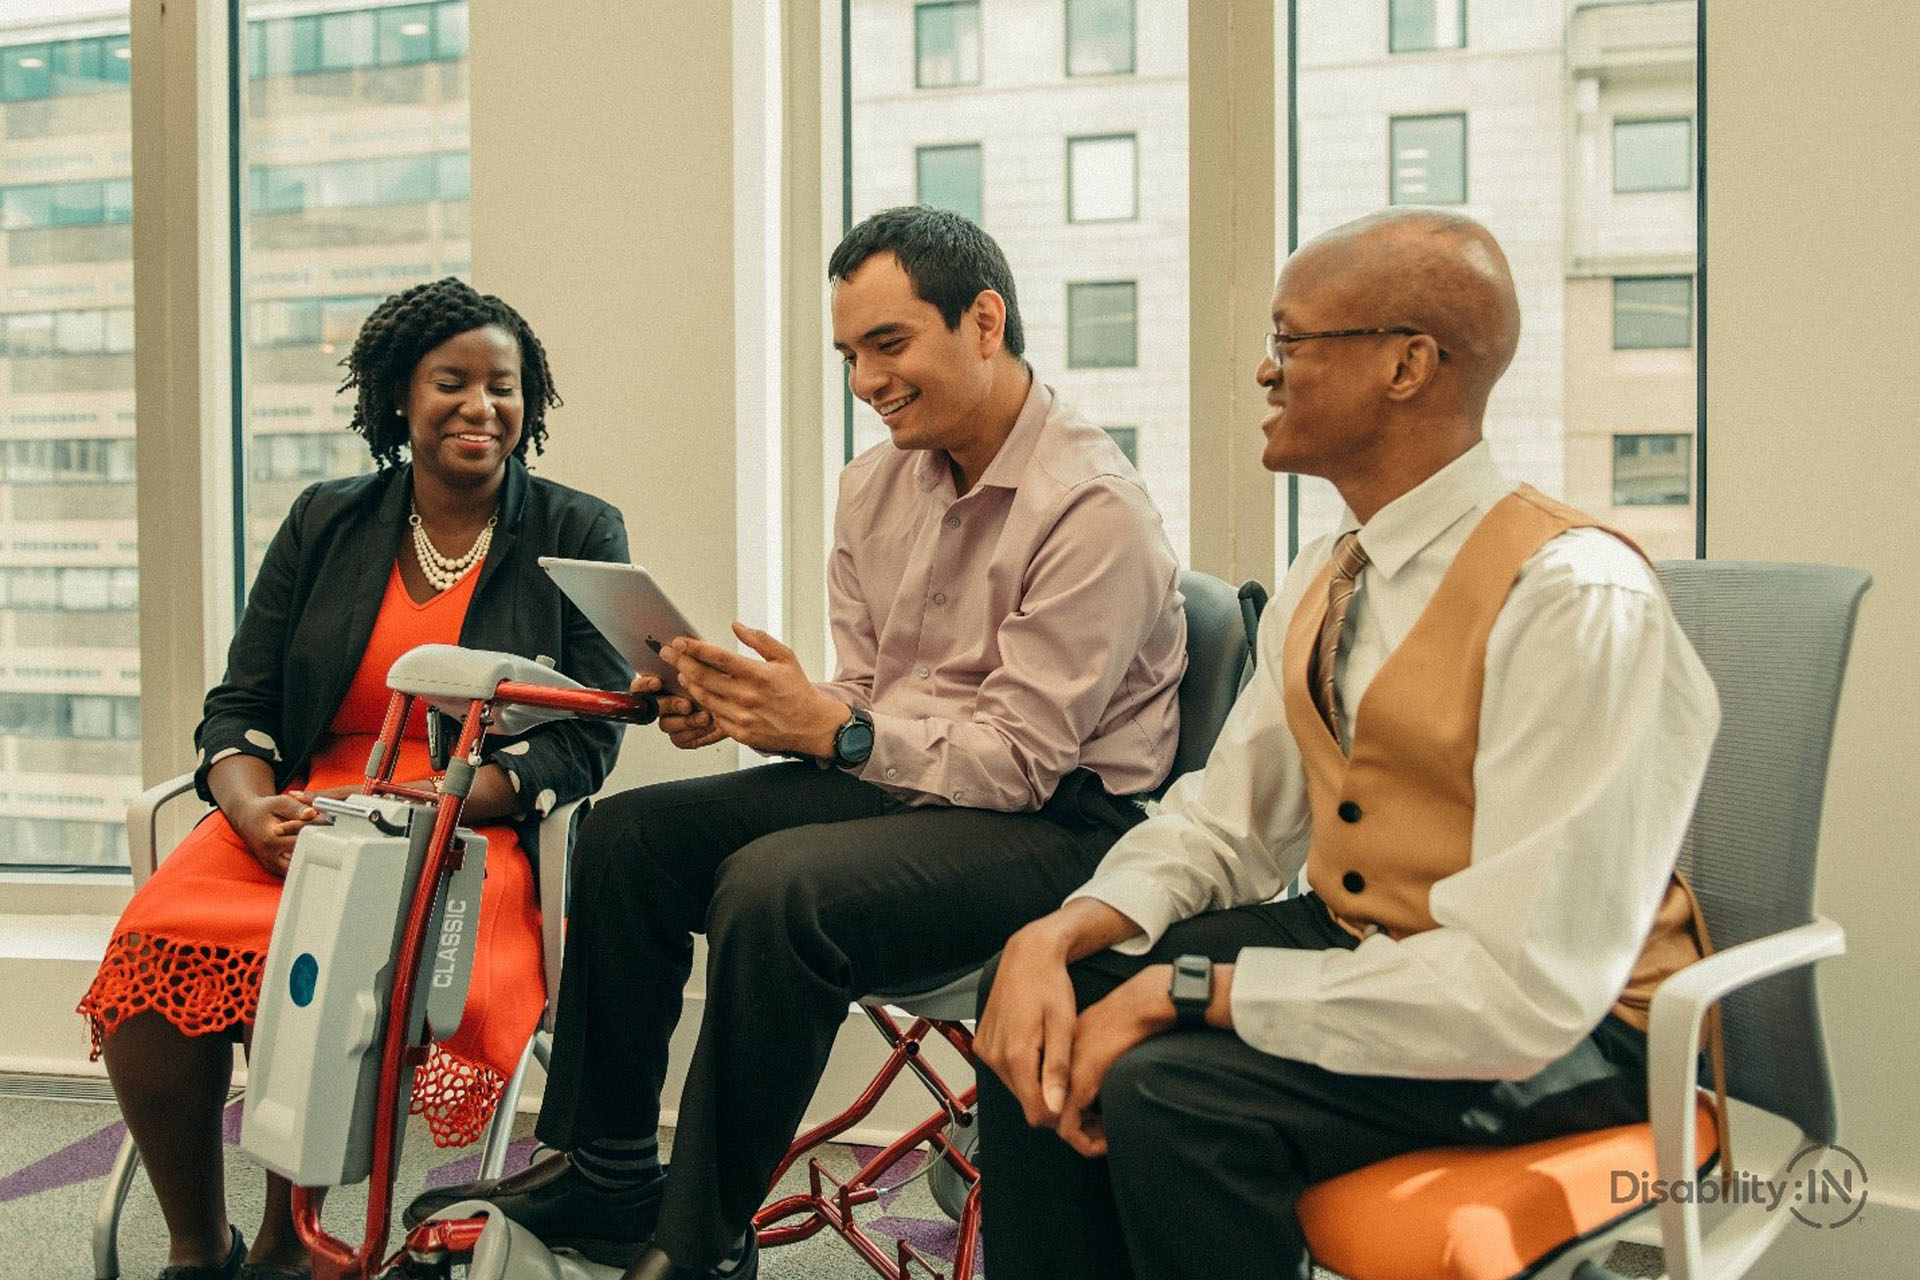 Three disabled people are in an office engaged in conversation. One person is using a motorized scooter holding an ipad, while the two other people smile. Photo courtesy of Disabled:IN.